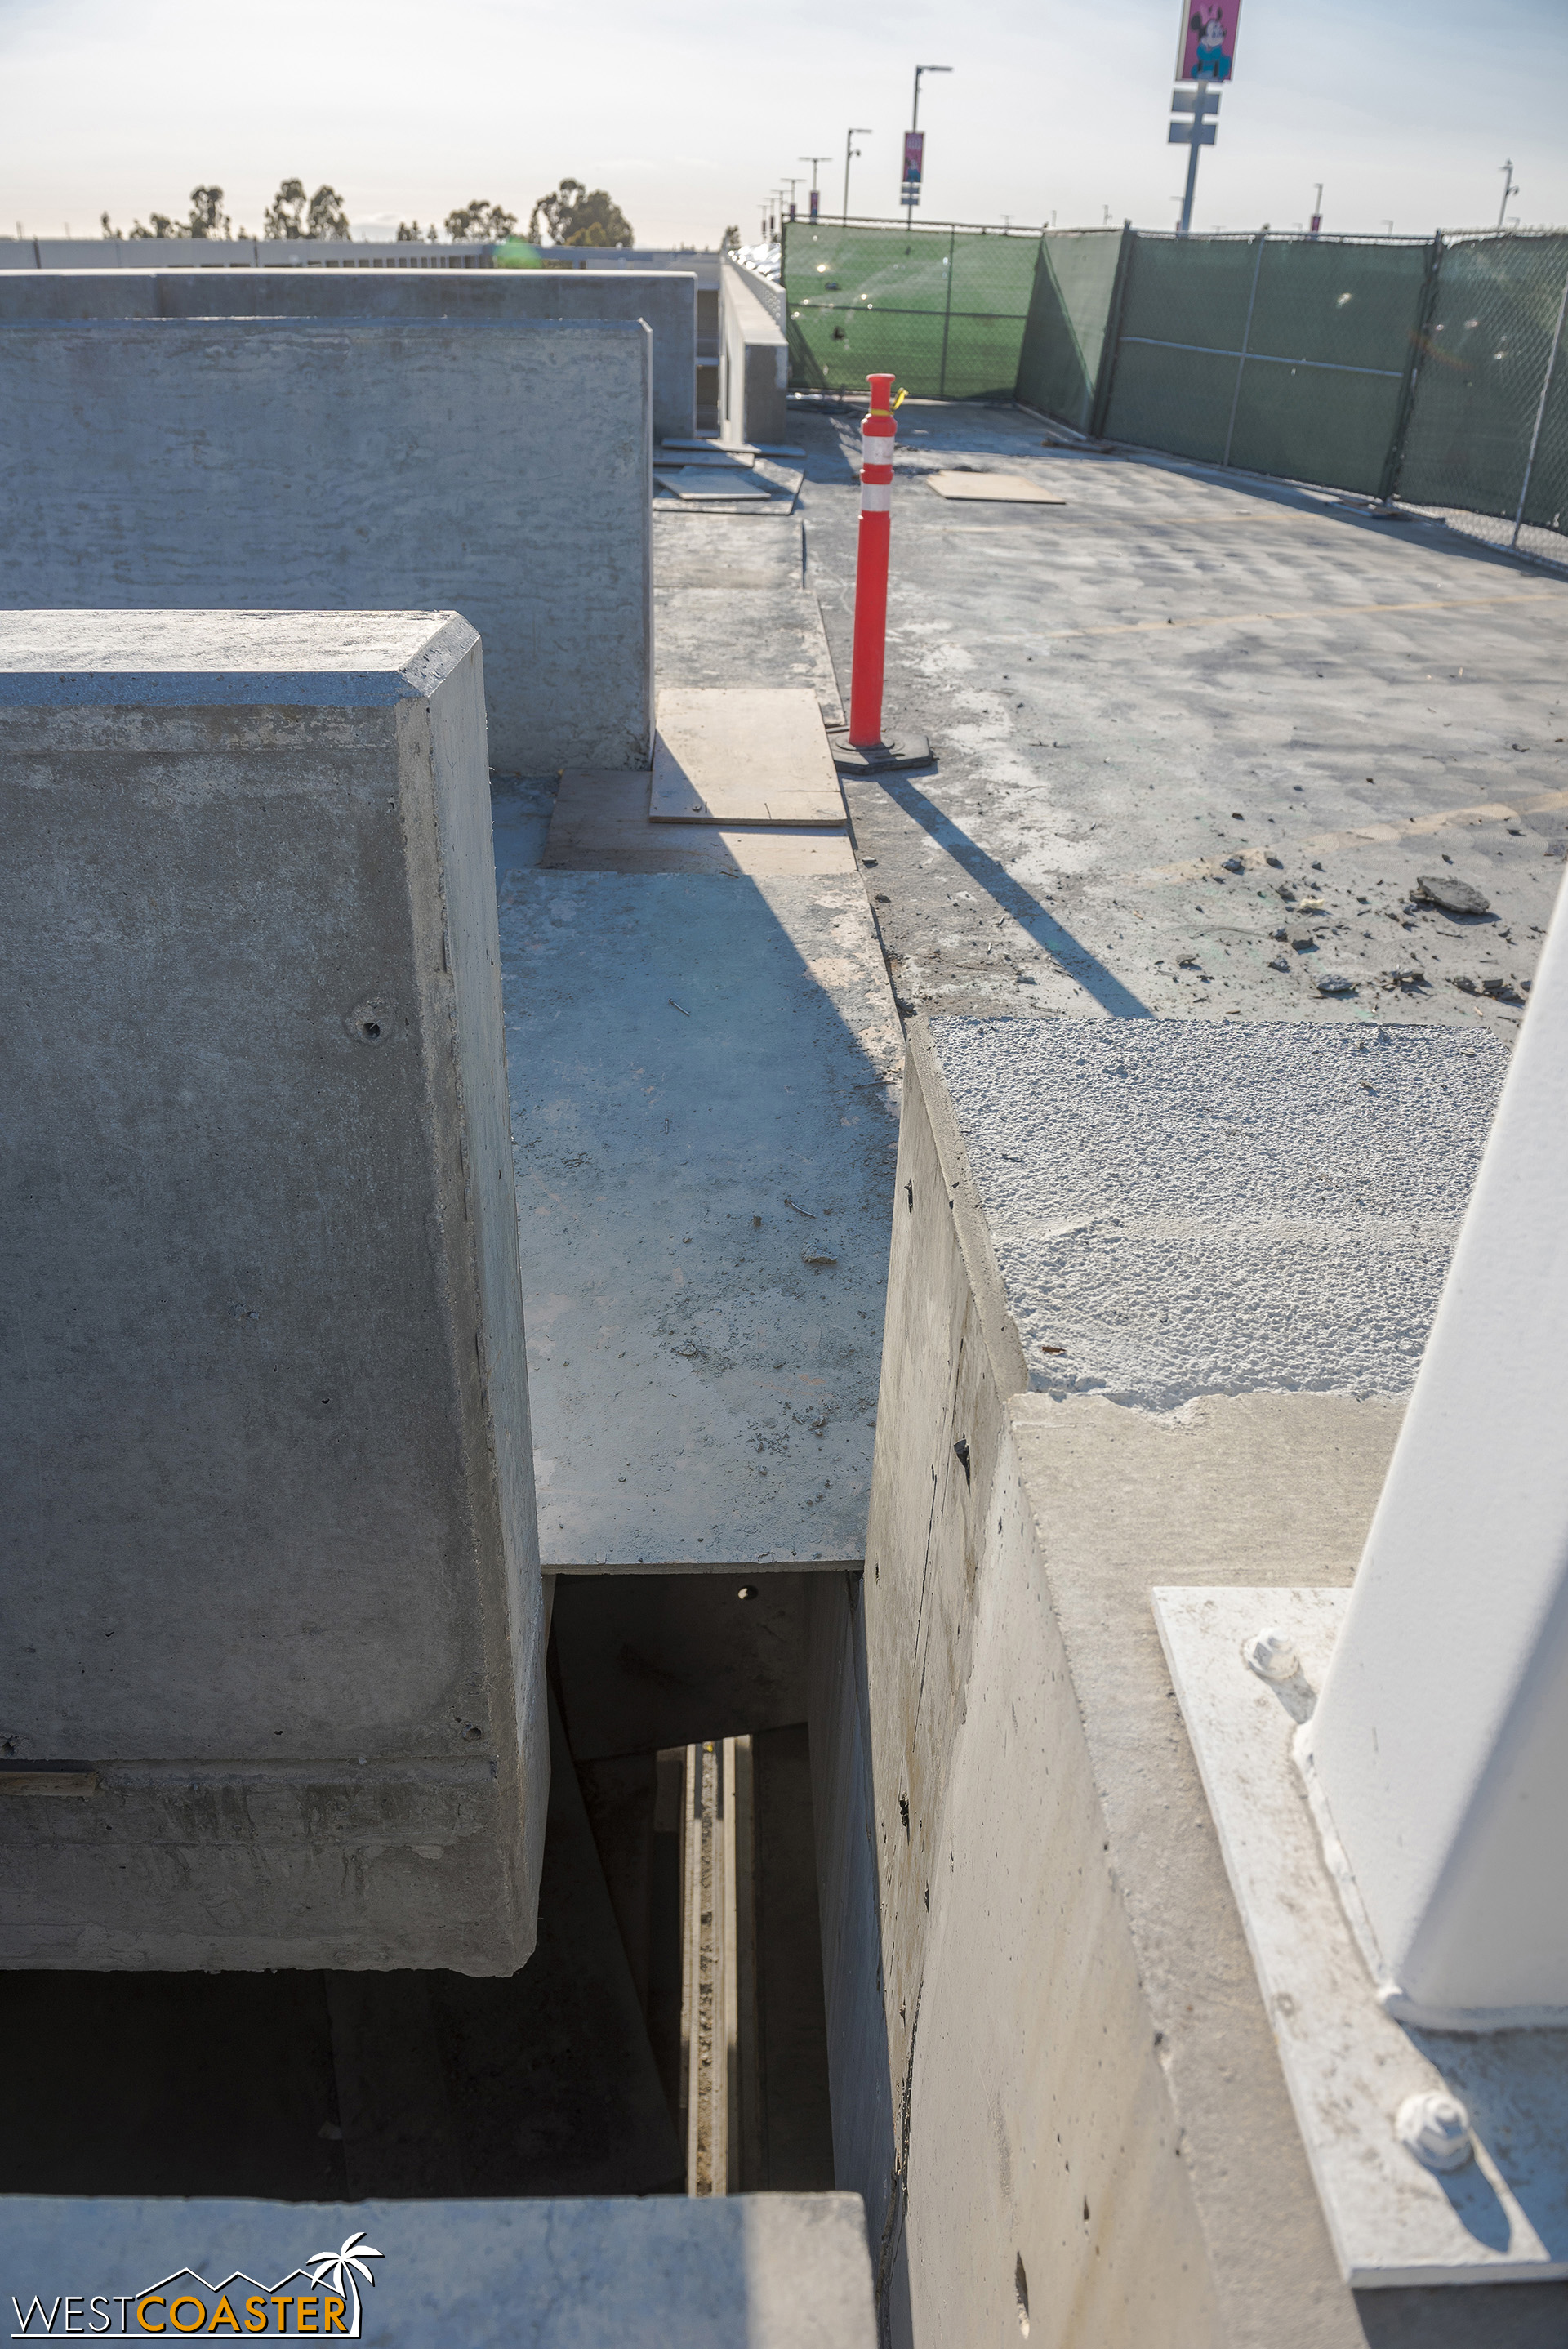  This gap between the bridge connecting the new structure to the old and the existing deck will be filled in with an expansion joint to allow for movement between the two structures.  It’s an earthquake accommodation thing. 